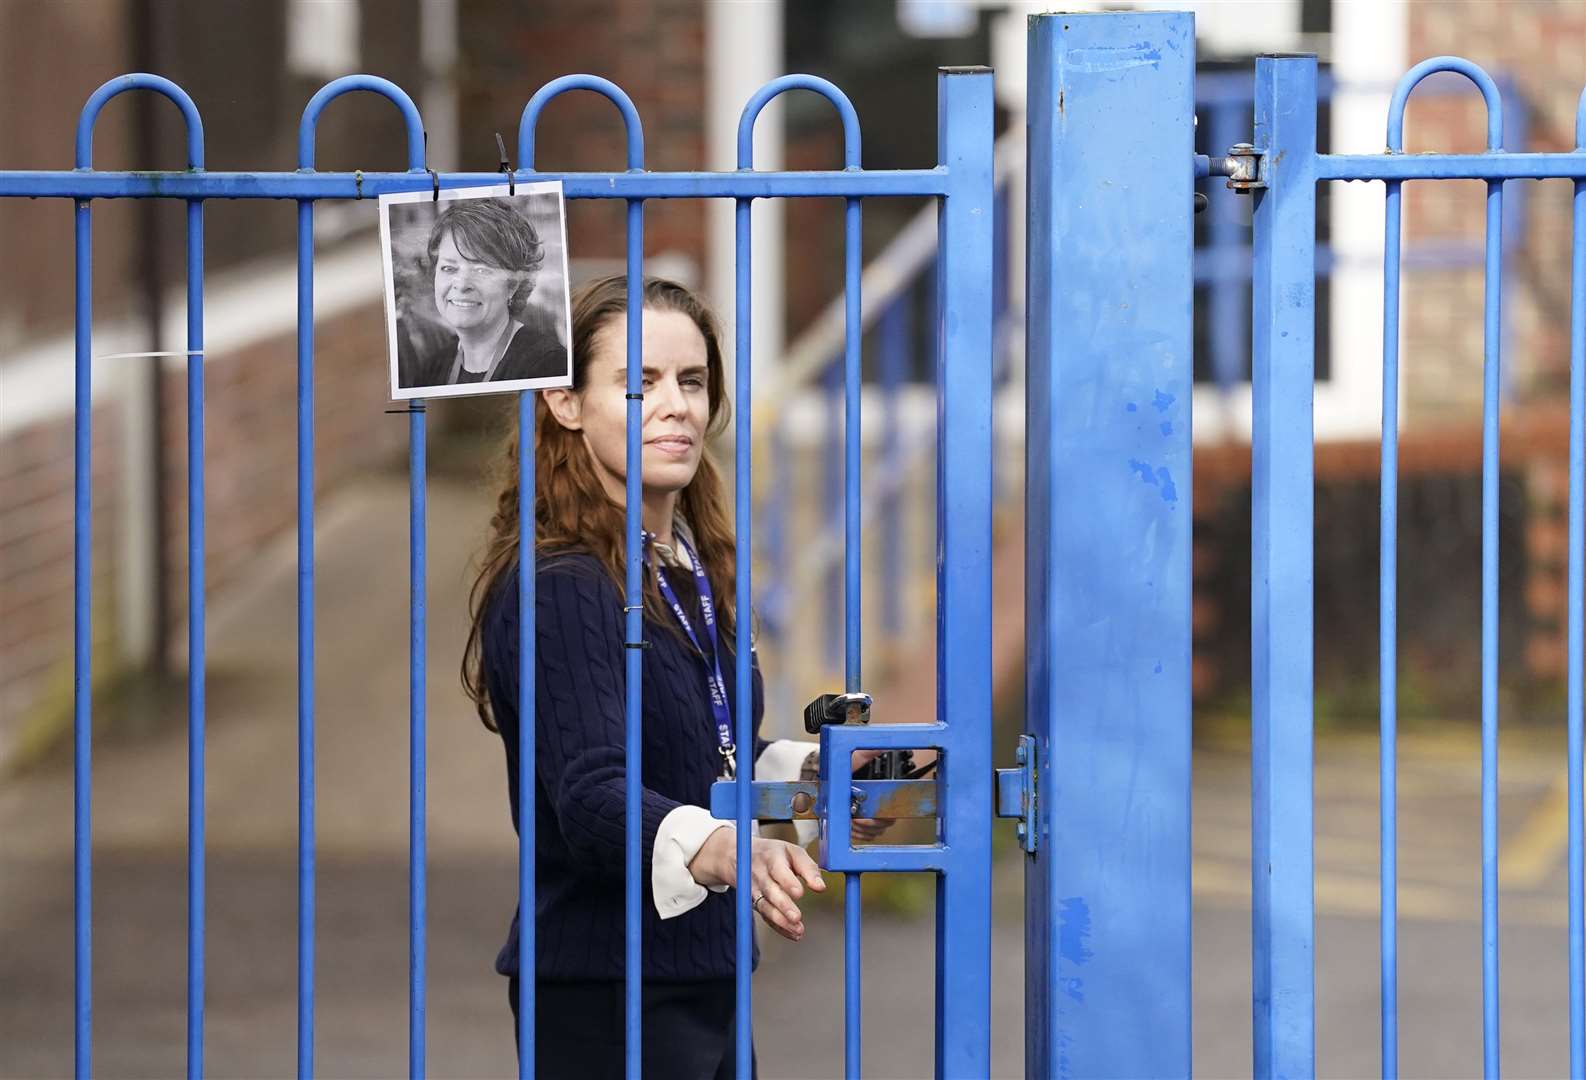 Headteacher Flora Cooper, wearing a black armband, stands next to a photograph of Ruth Perry as she closes the school gate at John Rankin Schools in Newbury, Berkshire (Andrew Matthews/PA)